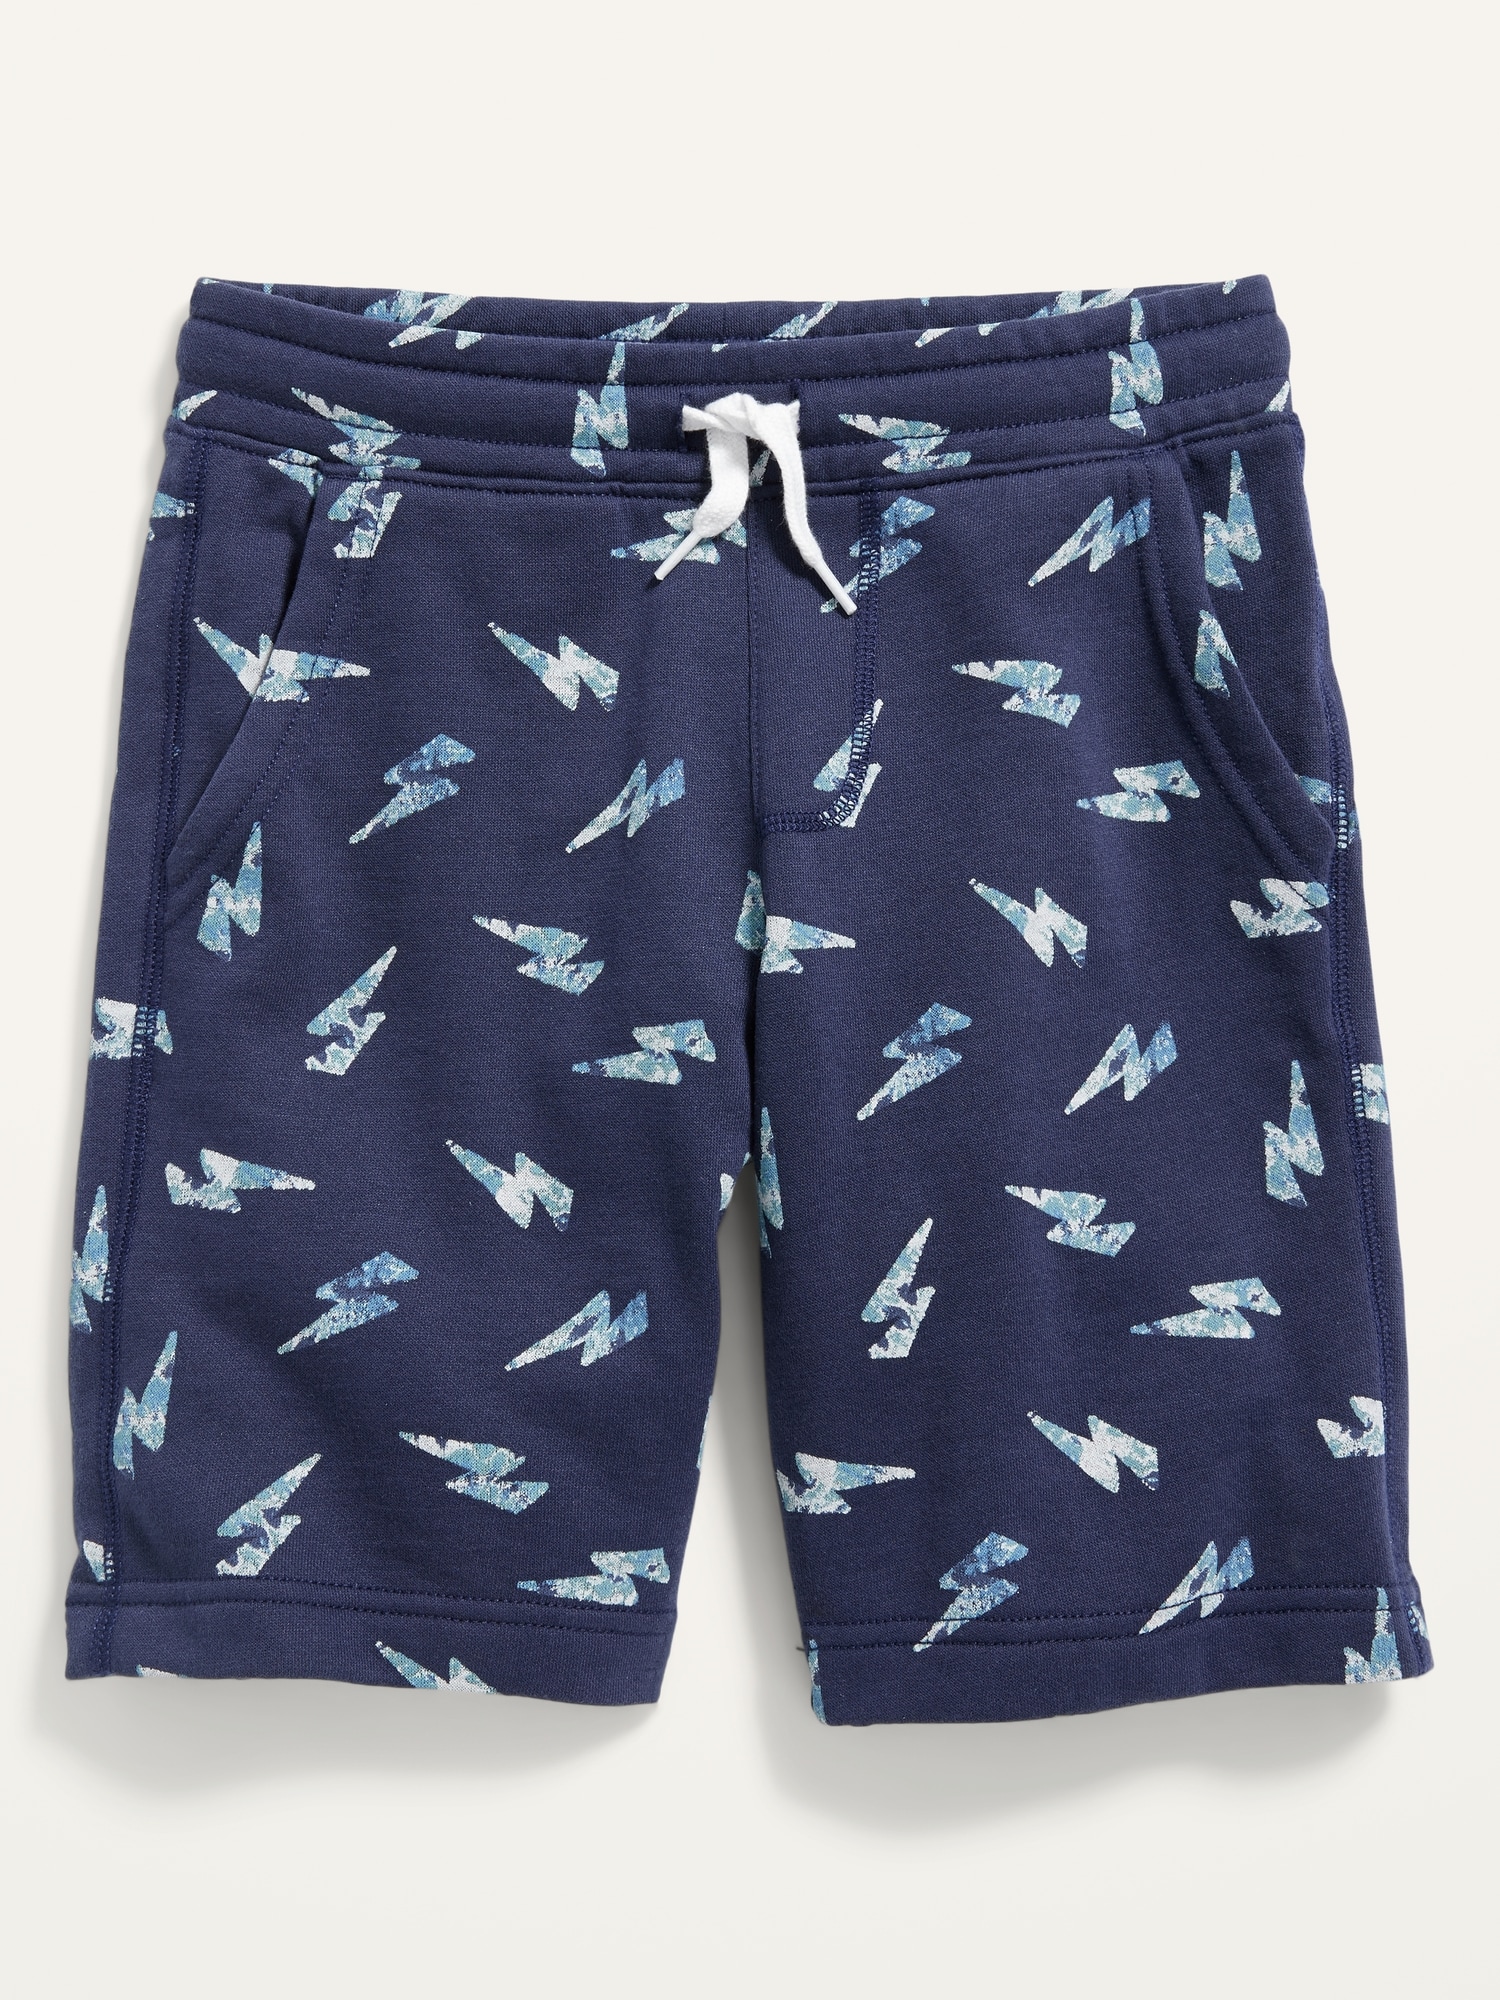 Vintage Printed Jogger Shorts for Boys | Old Navy